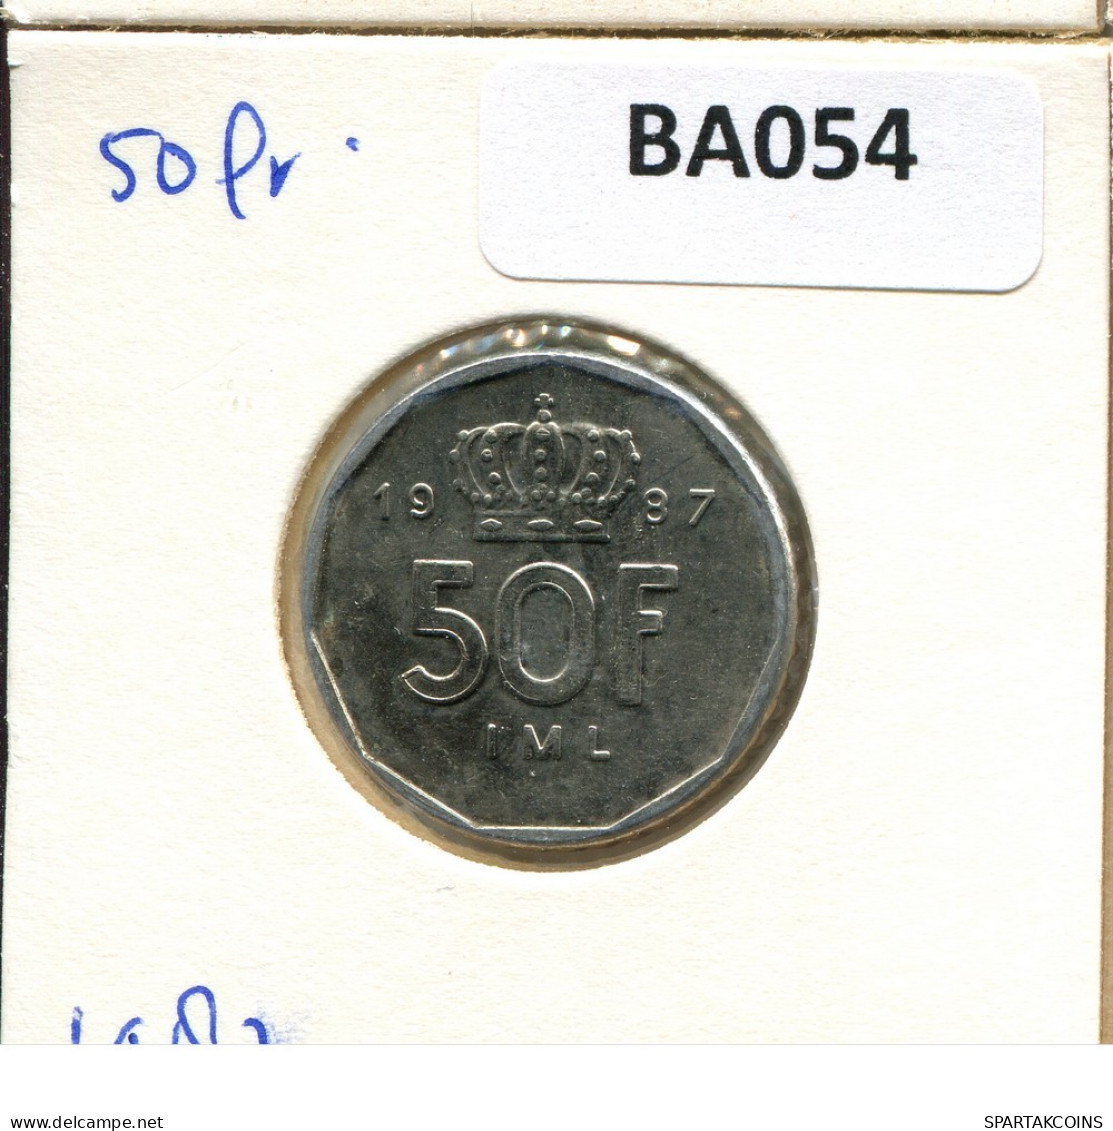 50 FRANCS 1987 LUXEMBOURG Coin #BA054.U.A - Luxembourg